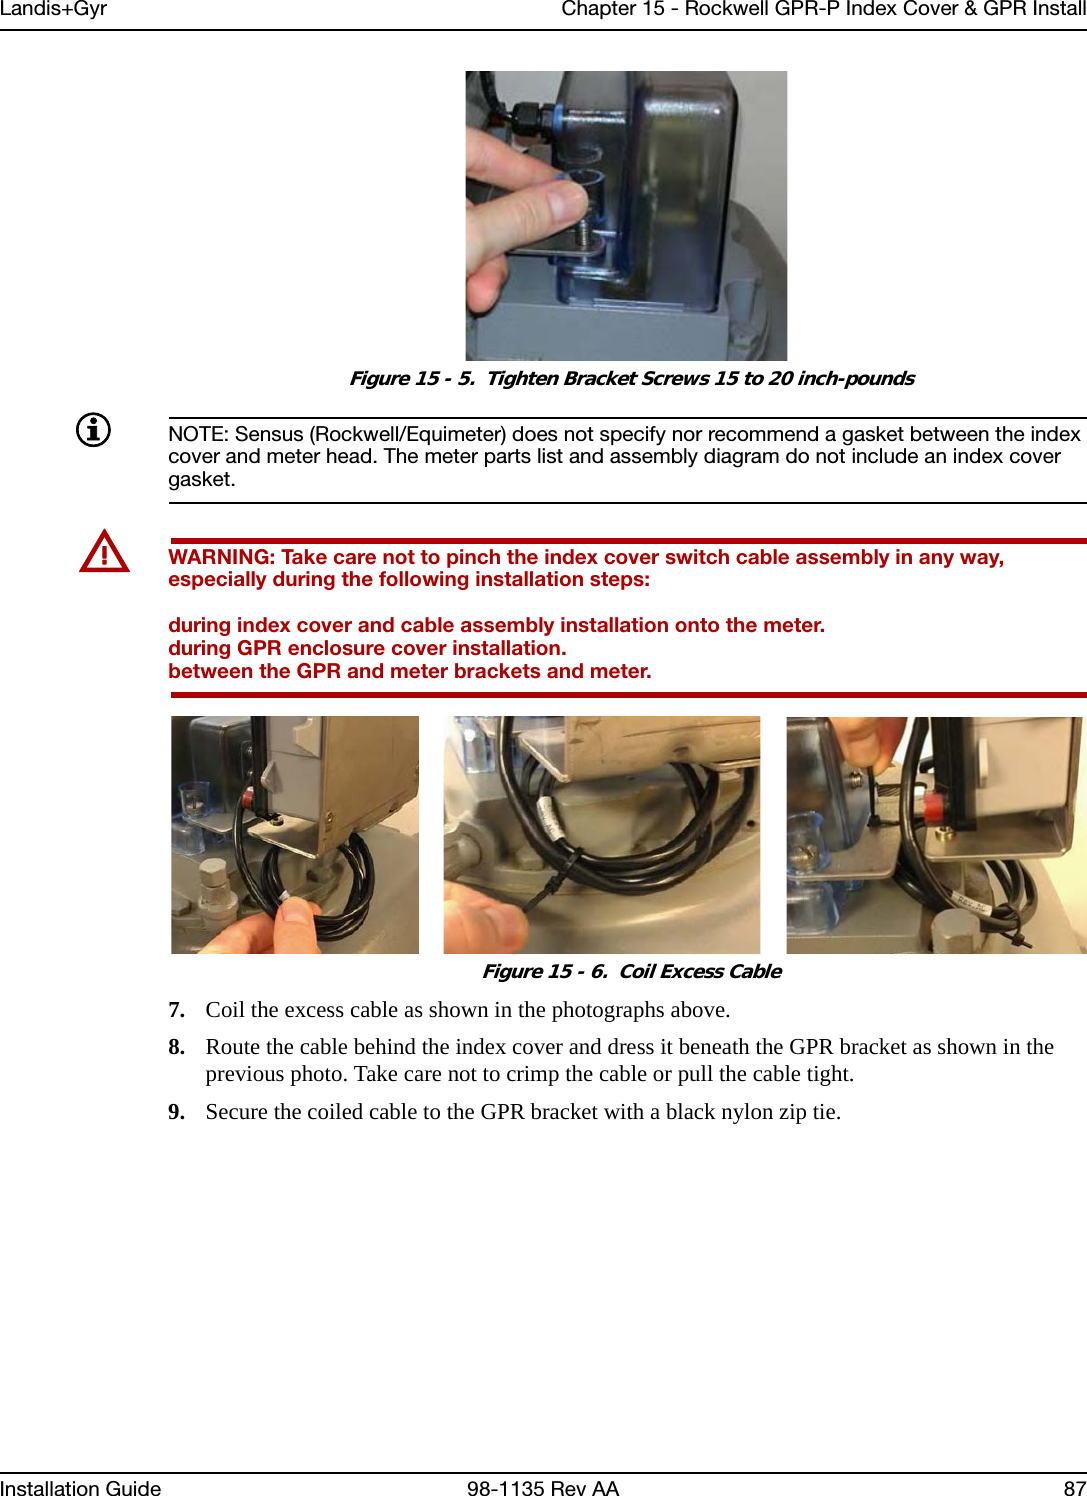 Landis+Gyr Chapter 15 - Rockwell GPR-P Index Cover &amp; GPR InstallInstallation Guide 98-1135 Rev AA 87 Figure 15 - 5.  Tighten Bracket Screws 15 to 20 inch-poundsNOTE: Sensus (Rockwell/Equimeter) does not specify nor recommend a gasket between the index cover and meter head. The meter parts list and assembly diagram do not include an index cover gasket.UWARNING: Take care not to pinch the index cover switch cable assembly in any way, especially during the following installation steps:during index cover and cable assembly installation onto the meter.during GPR enclosure cover installation.between the GPR and meter brackets and meter.  Figure 15 - 6.  Coil Excess Cable7. Coil the excess cable as shown in the photographs above.8. Route the cable behind the index cover and dress it beneath the GPR bracket as shown in the previous photo. Take care not to crimp the cable or pull the cable tight.9. Secure the coiled cable to the GPR bracket with a black nylon zip tie.